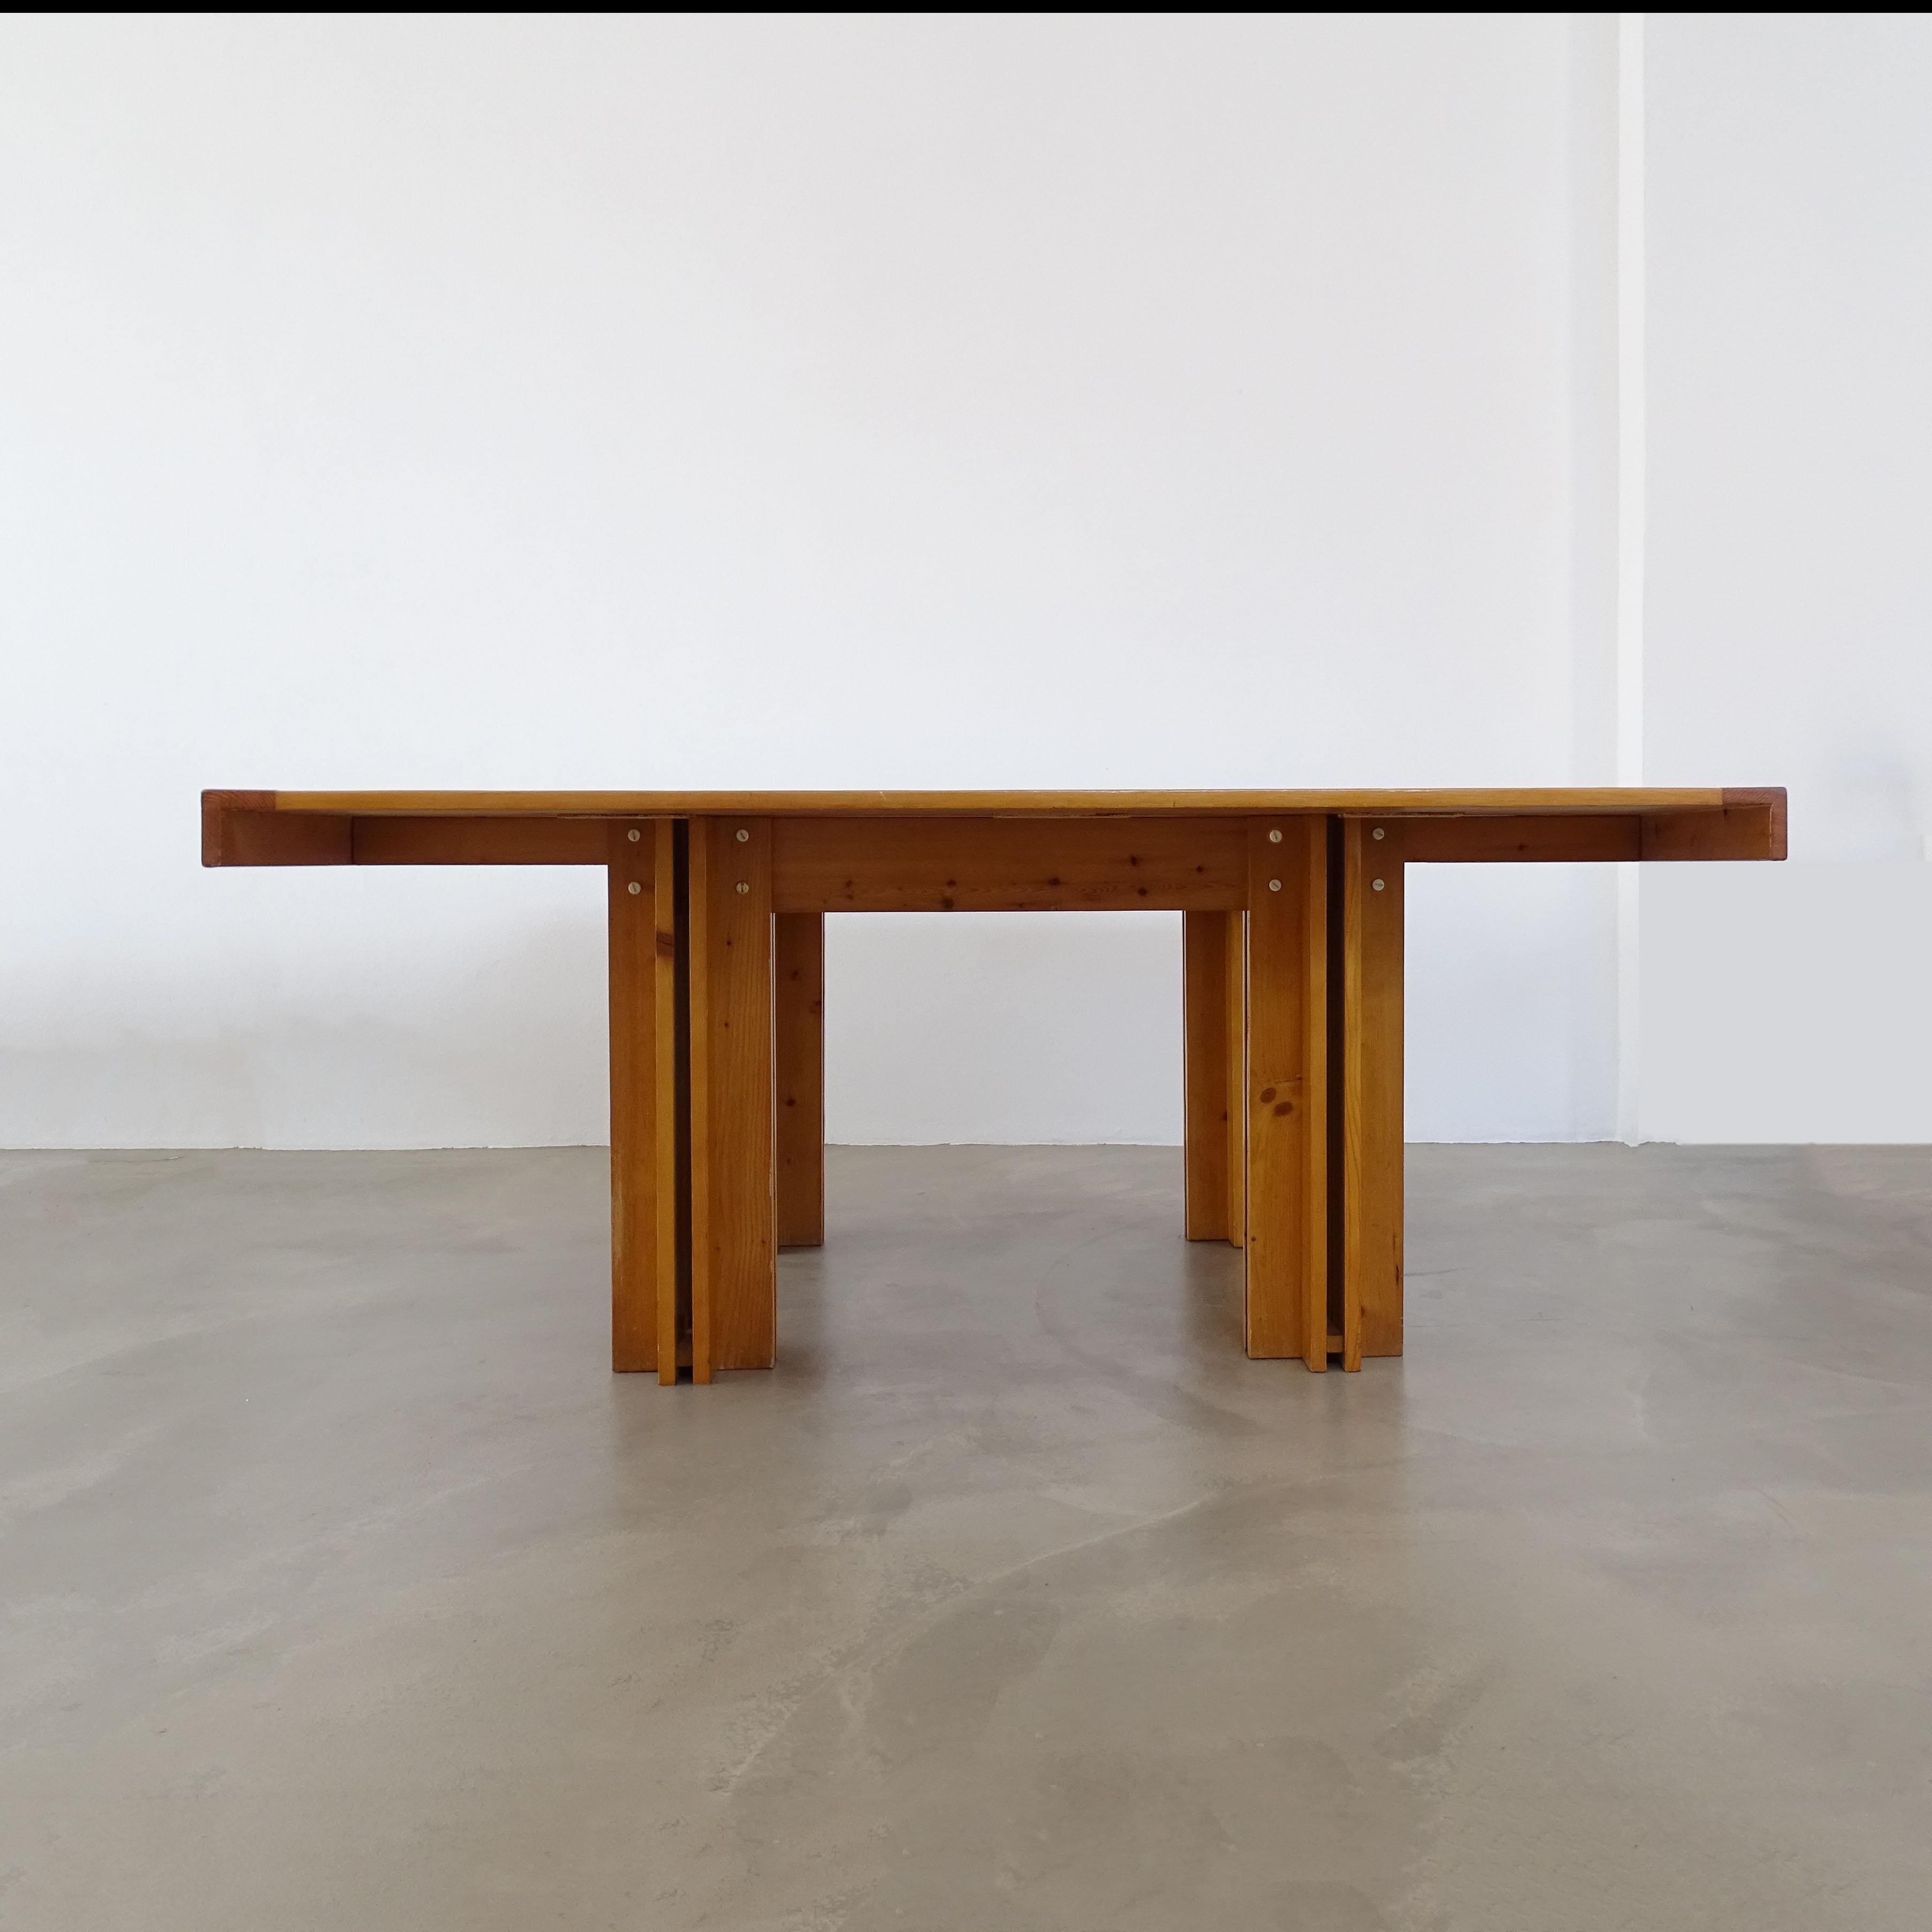 Early and Large version Carlo Scarpa Quatour table for the Metamobile series by Simon Gavina, Italy 1974.